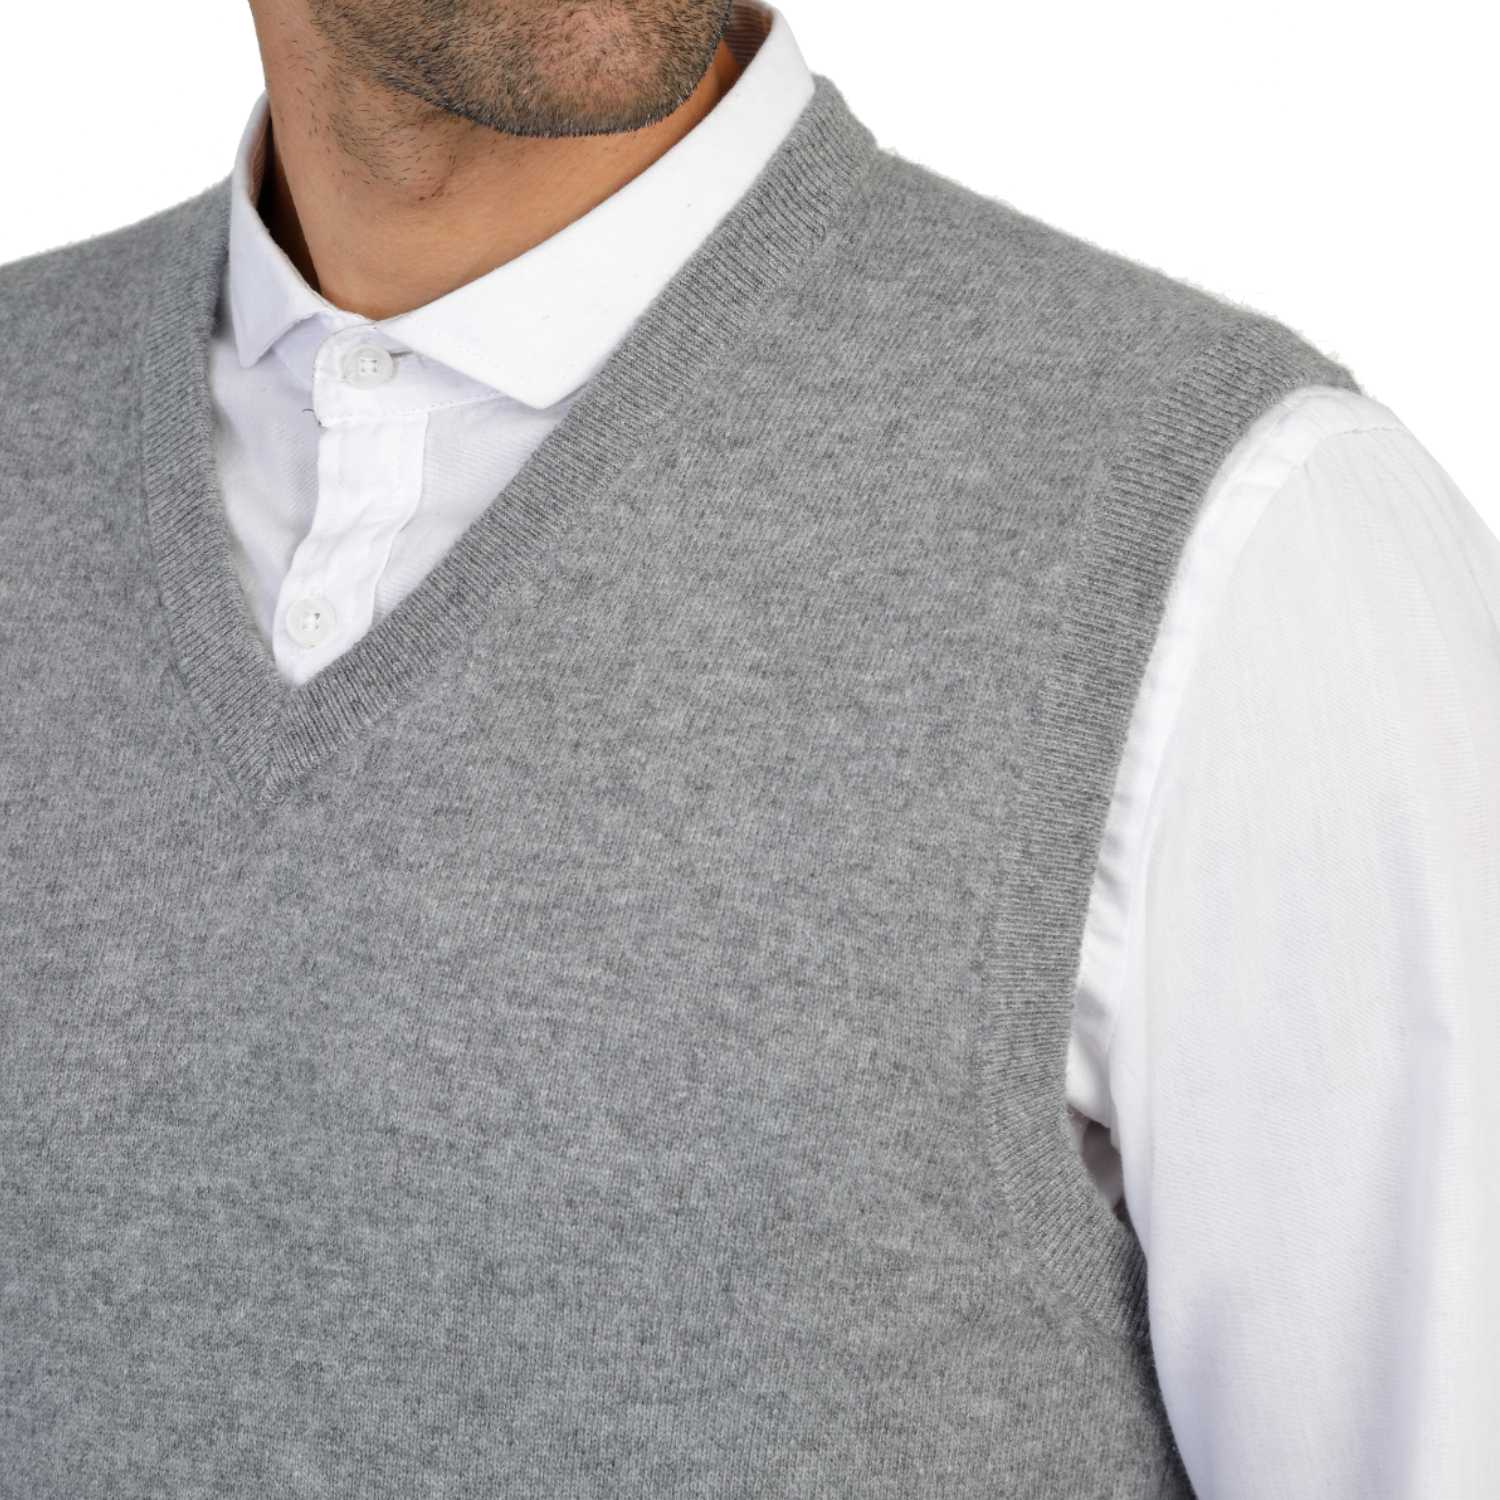 Mens Grey Cashmere Sleeveless Vest Sweater | Close up | Shop at The Cashmere Choice | London